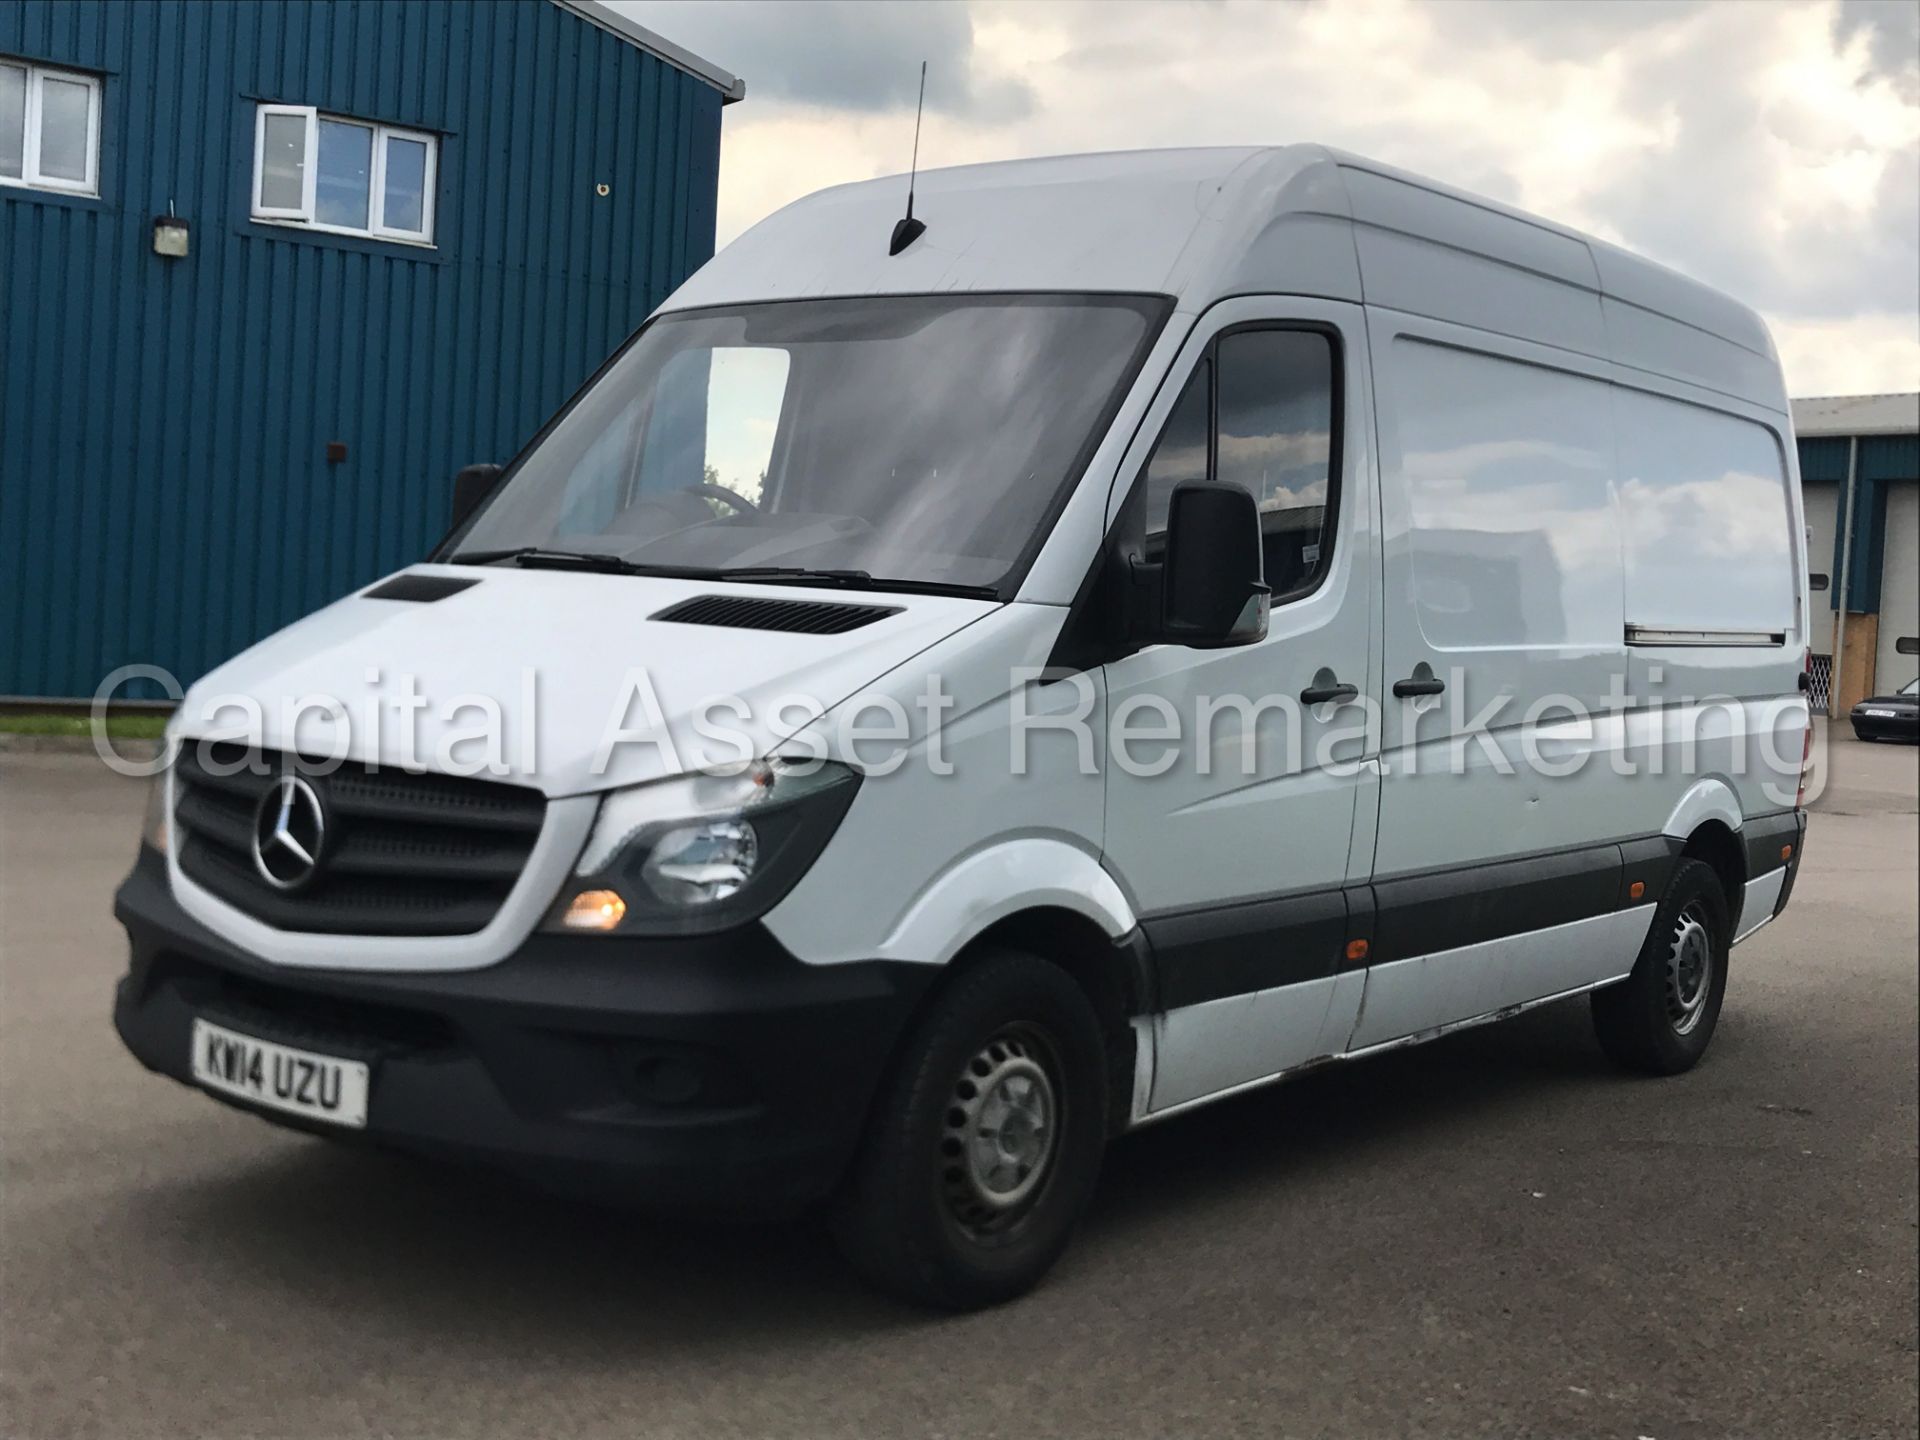 MERCEDES-BENZ SPRINTER 313 CDI 'MWB HI-ROOF' (2014) '130 BHP - 6 SPEED' (1 COMPANY OWNER FROM NEW) - Image 4 of 22